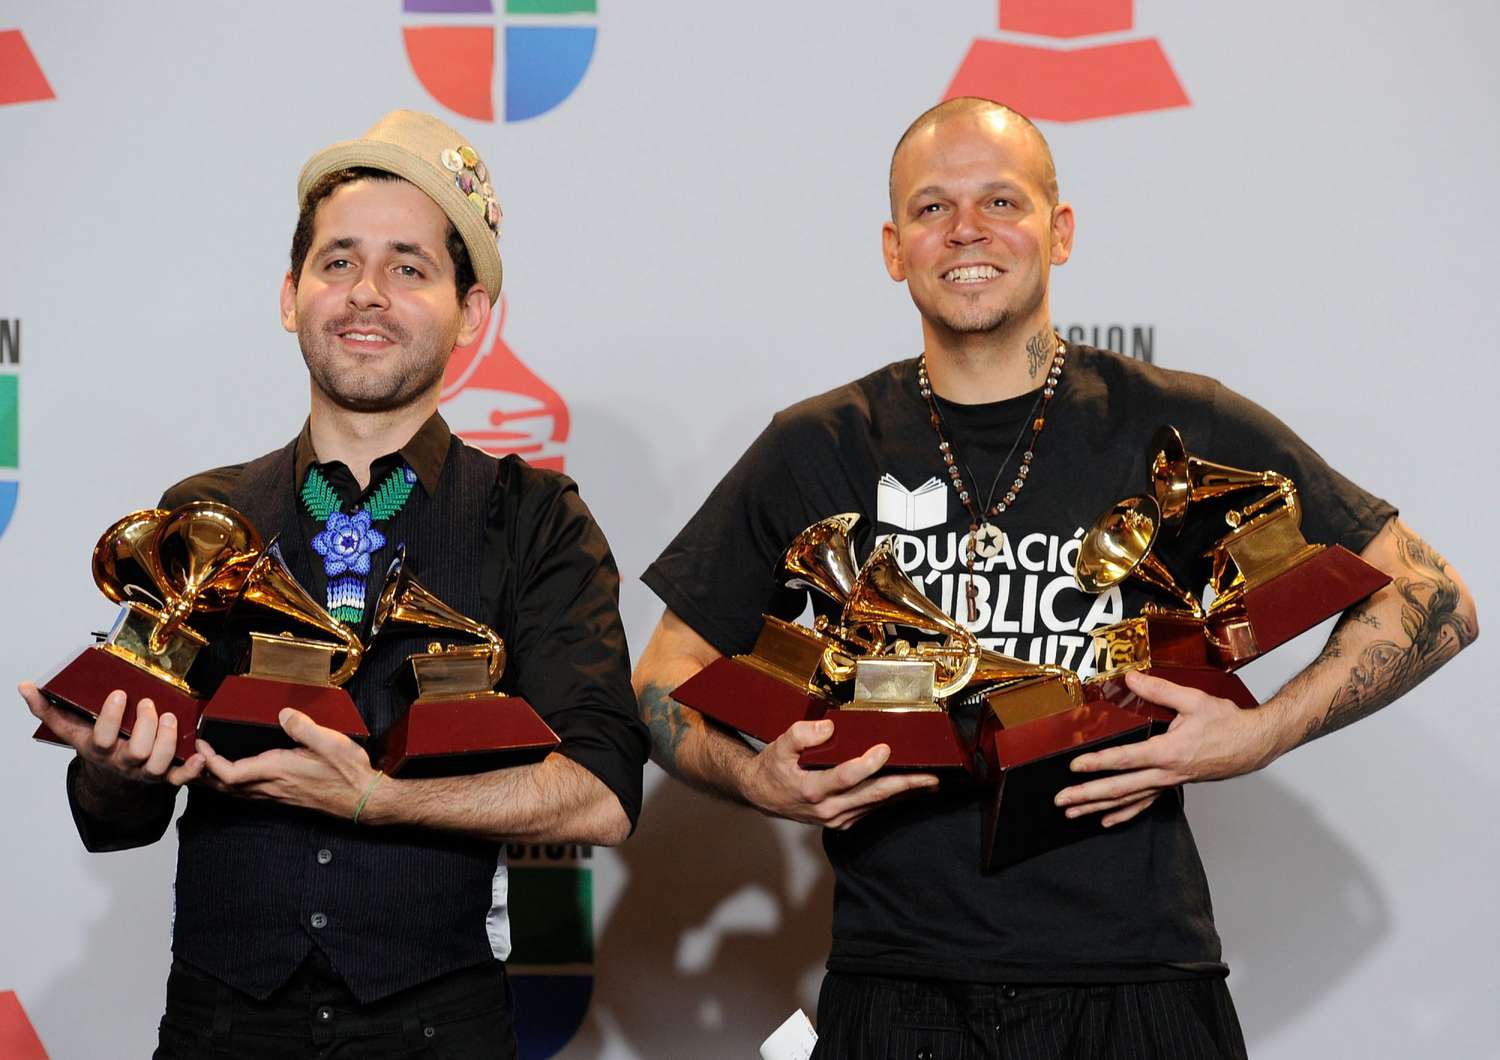 The 12th Annual Latin GRAMMY Awards - Press Room